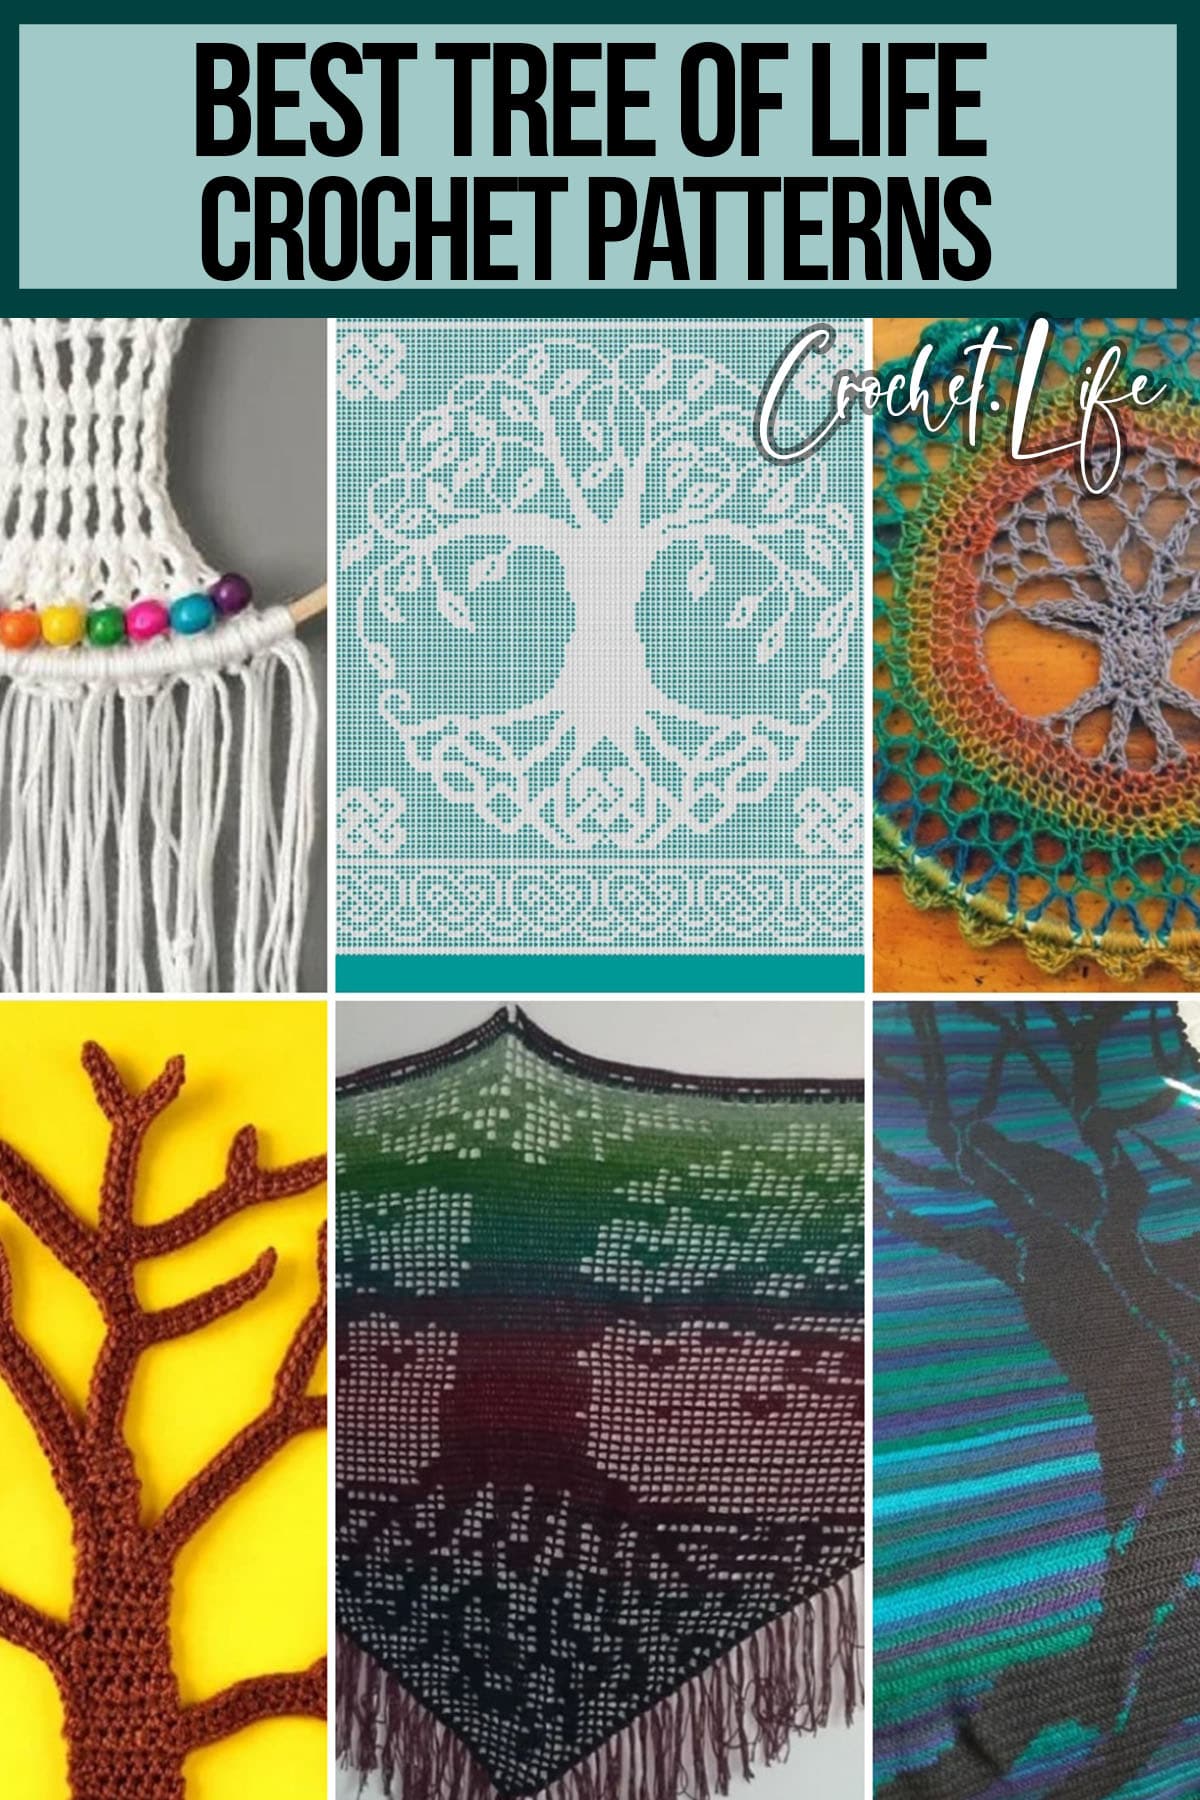 photo collage of crochet patterns for the tree of life with text which reads best tree of life crochet patterns